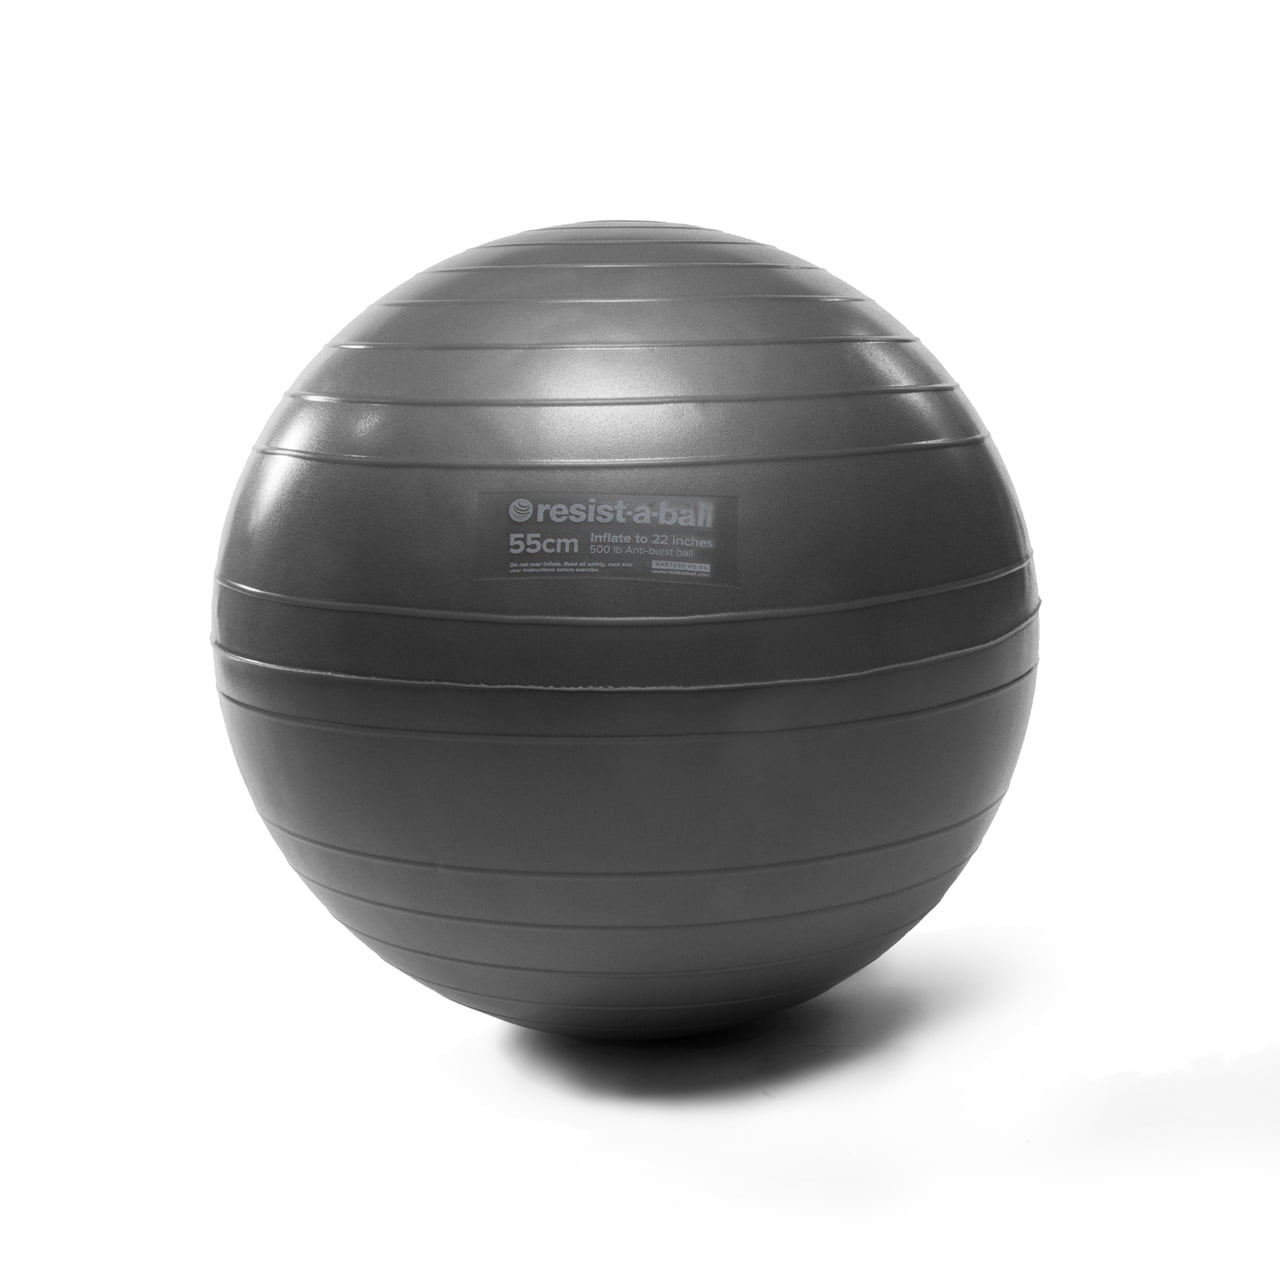 maximum load up to 500kg Gym Ball incl Pump 55 cm Silver 